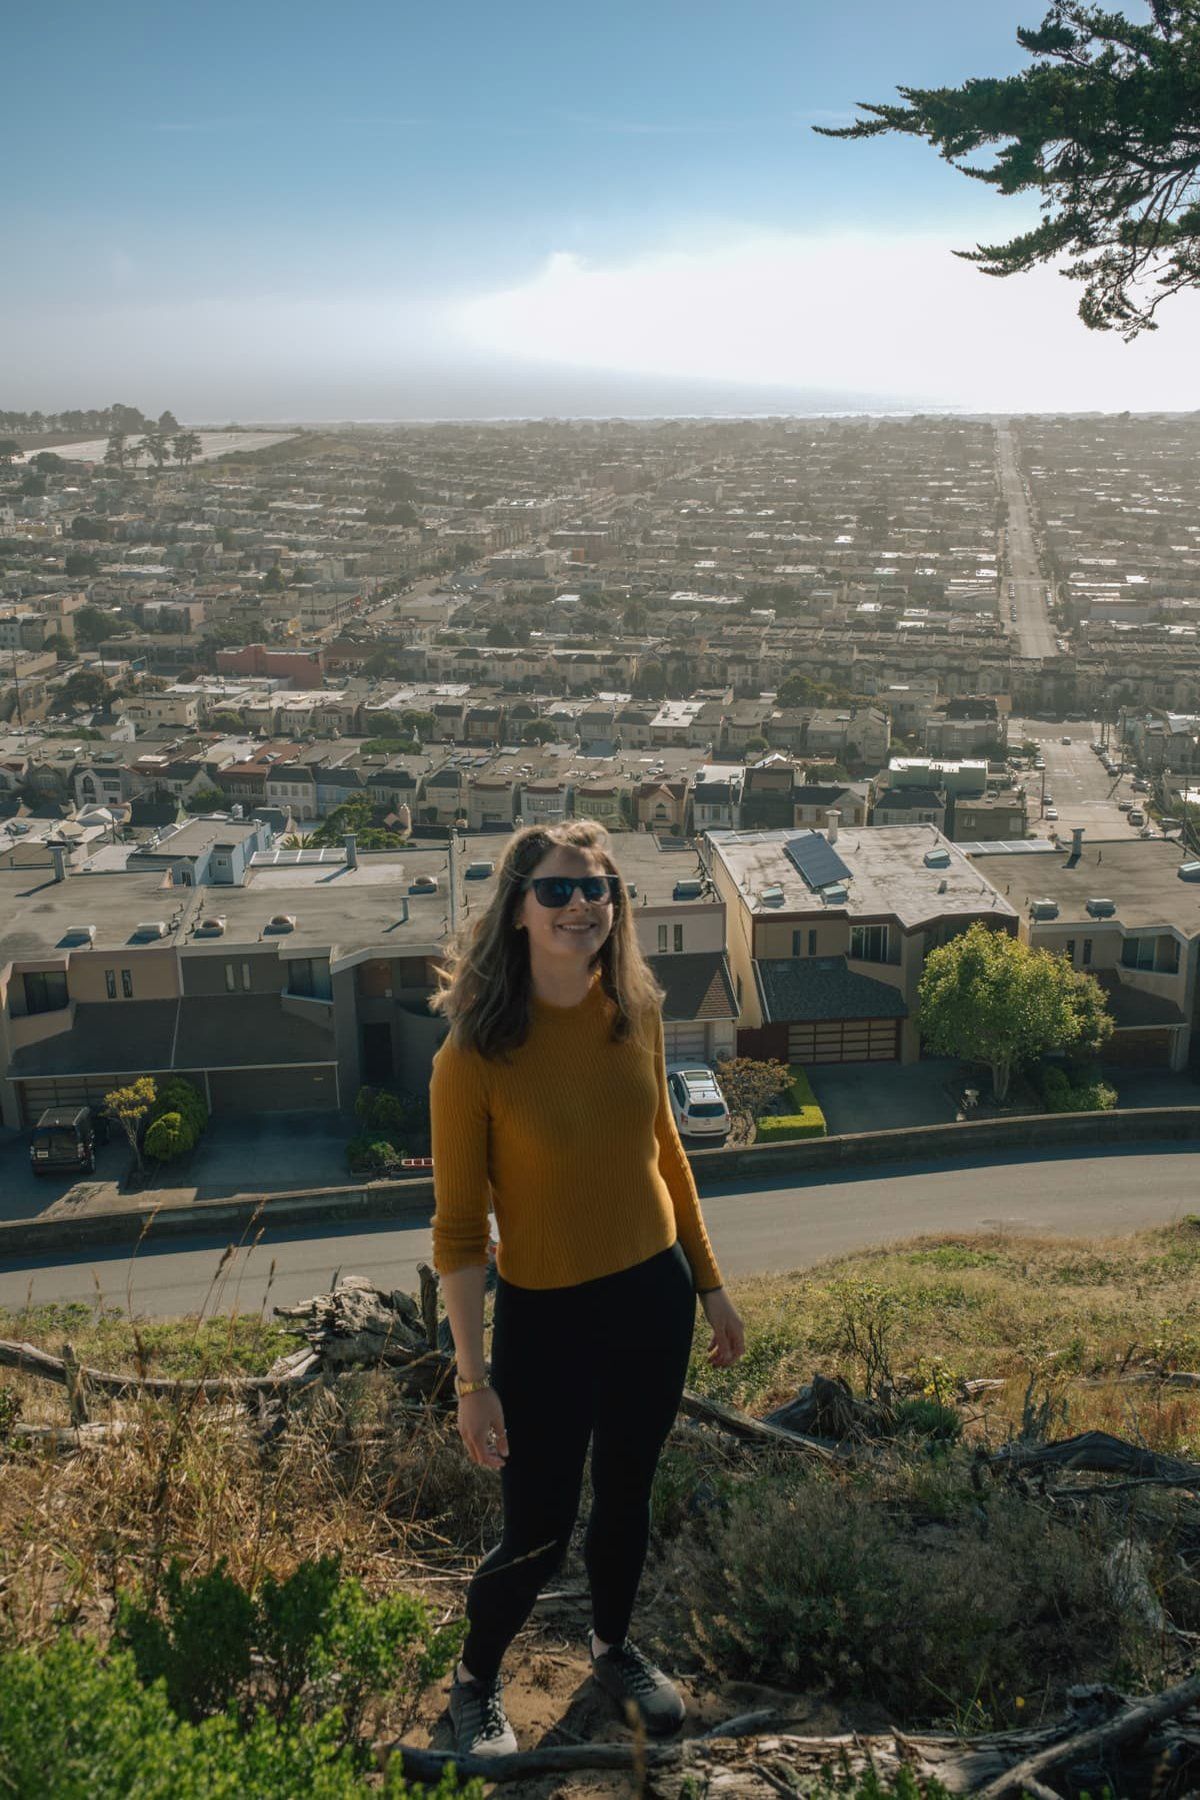 A young light-haired woman in black pants and a yellow shirt smiles at the camera as she stands on a hillside with a view of San Francisco behind her.